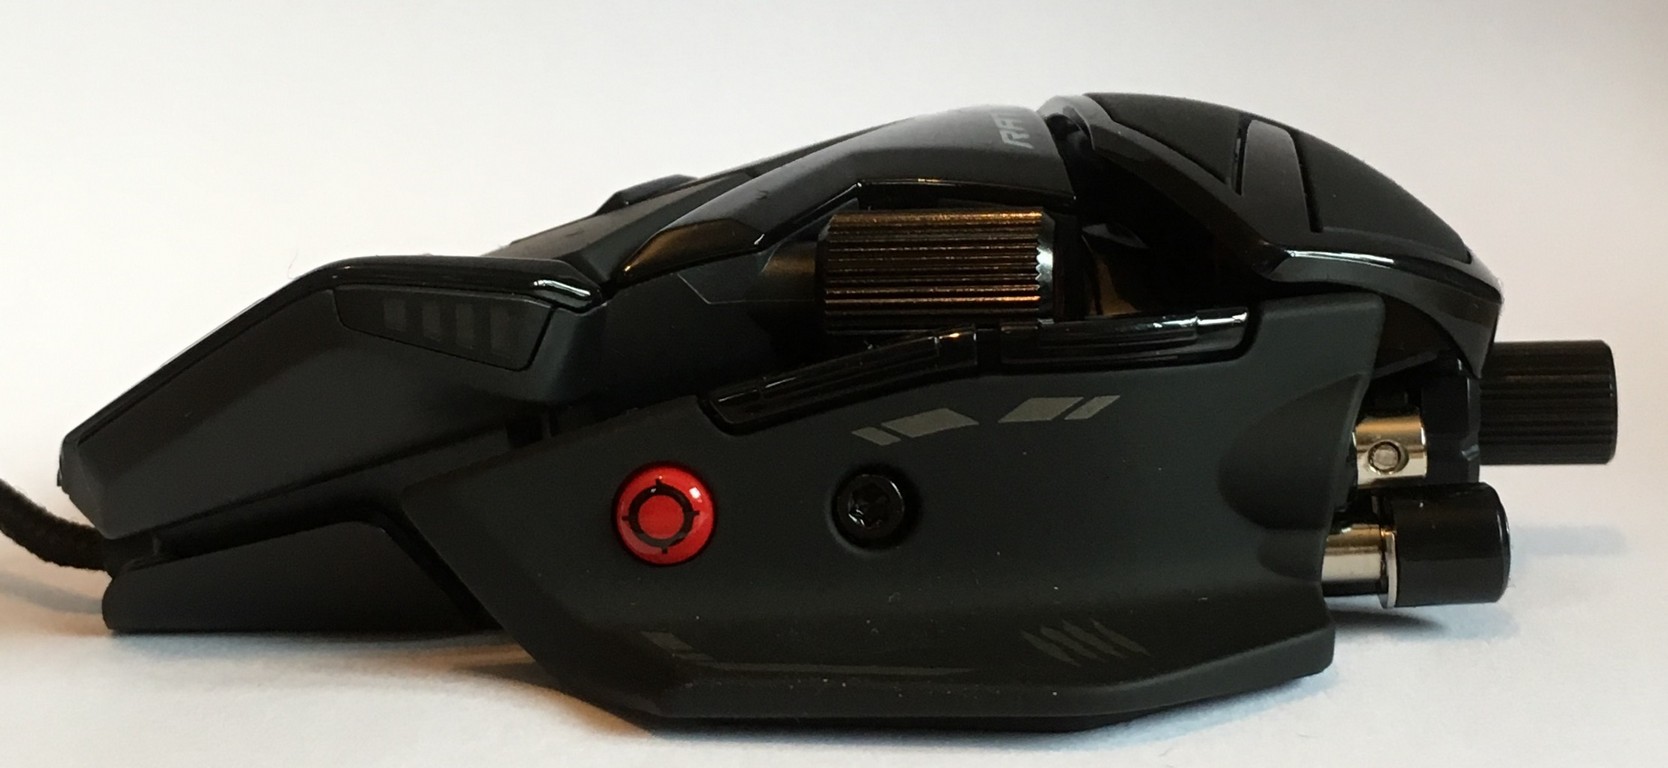 Mad Catz 8 Gaming Mouse Review - Shape Weight TechPowerUp